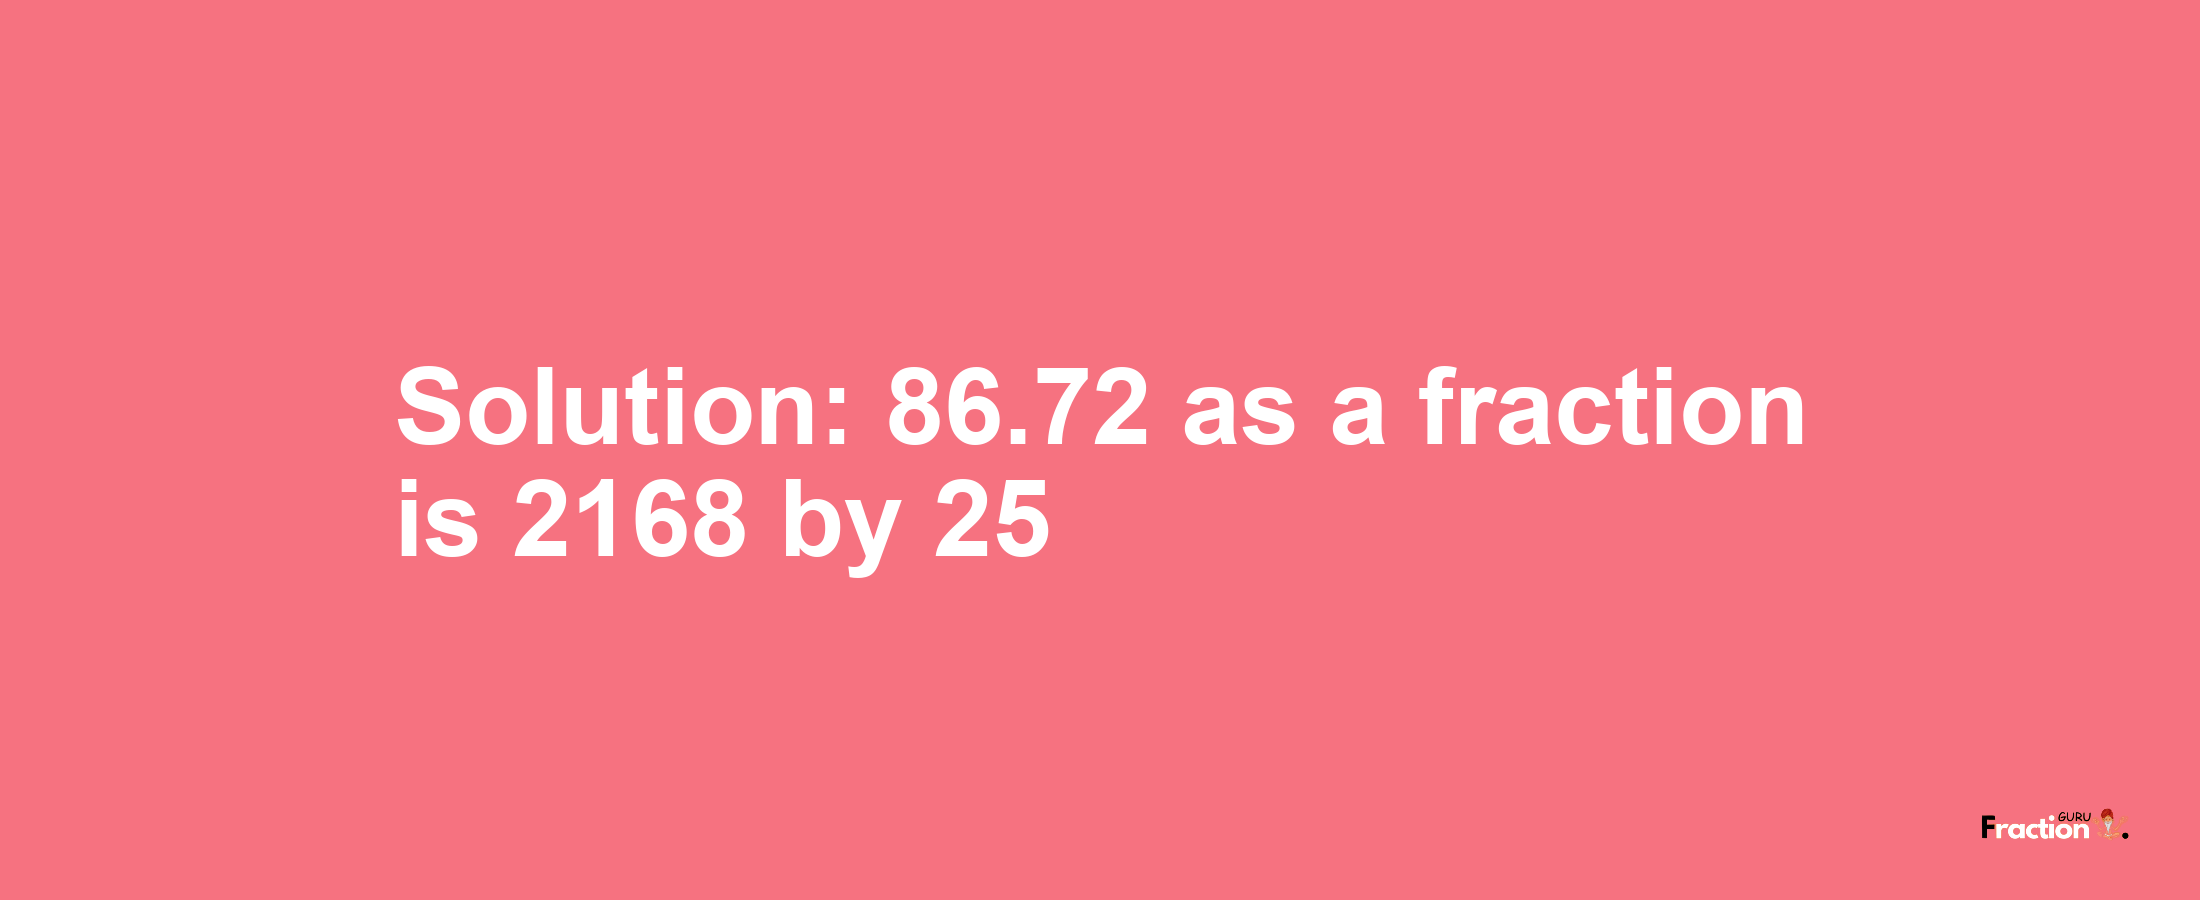 Solution:86.72 as a fraction is 2168/25